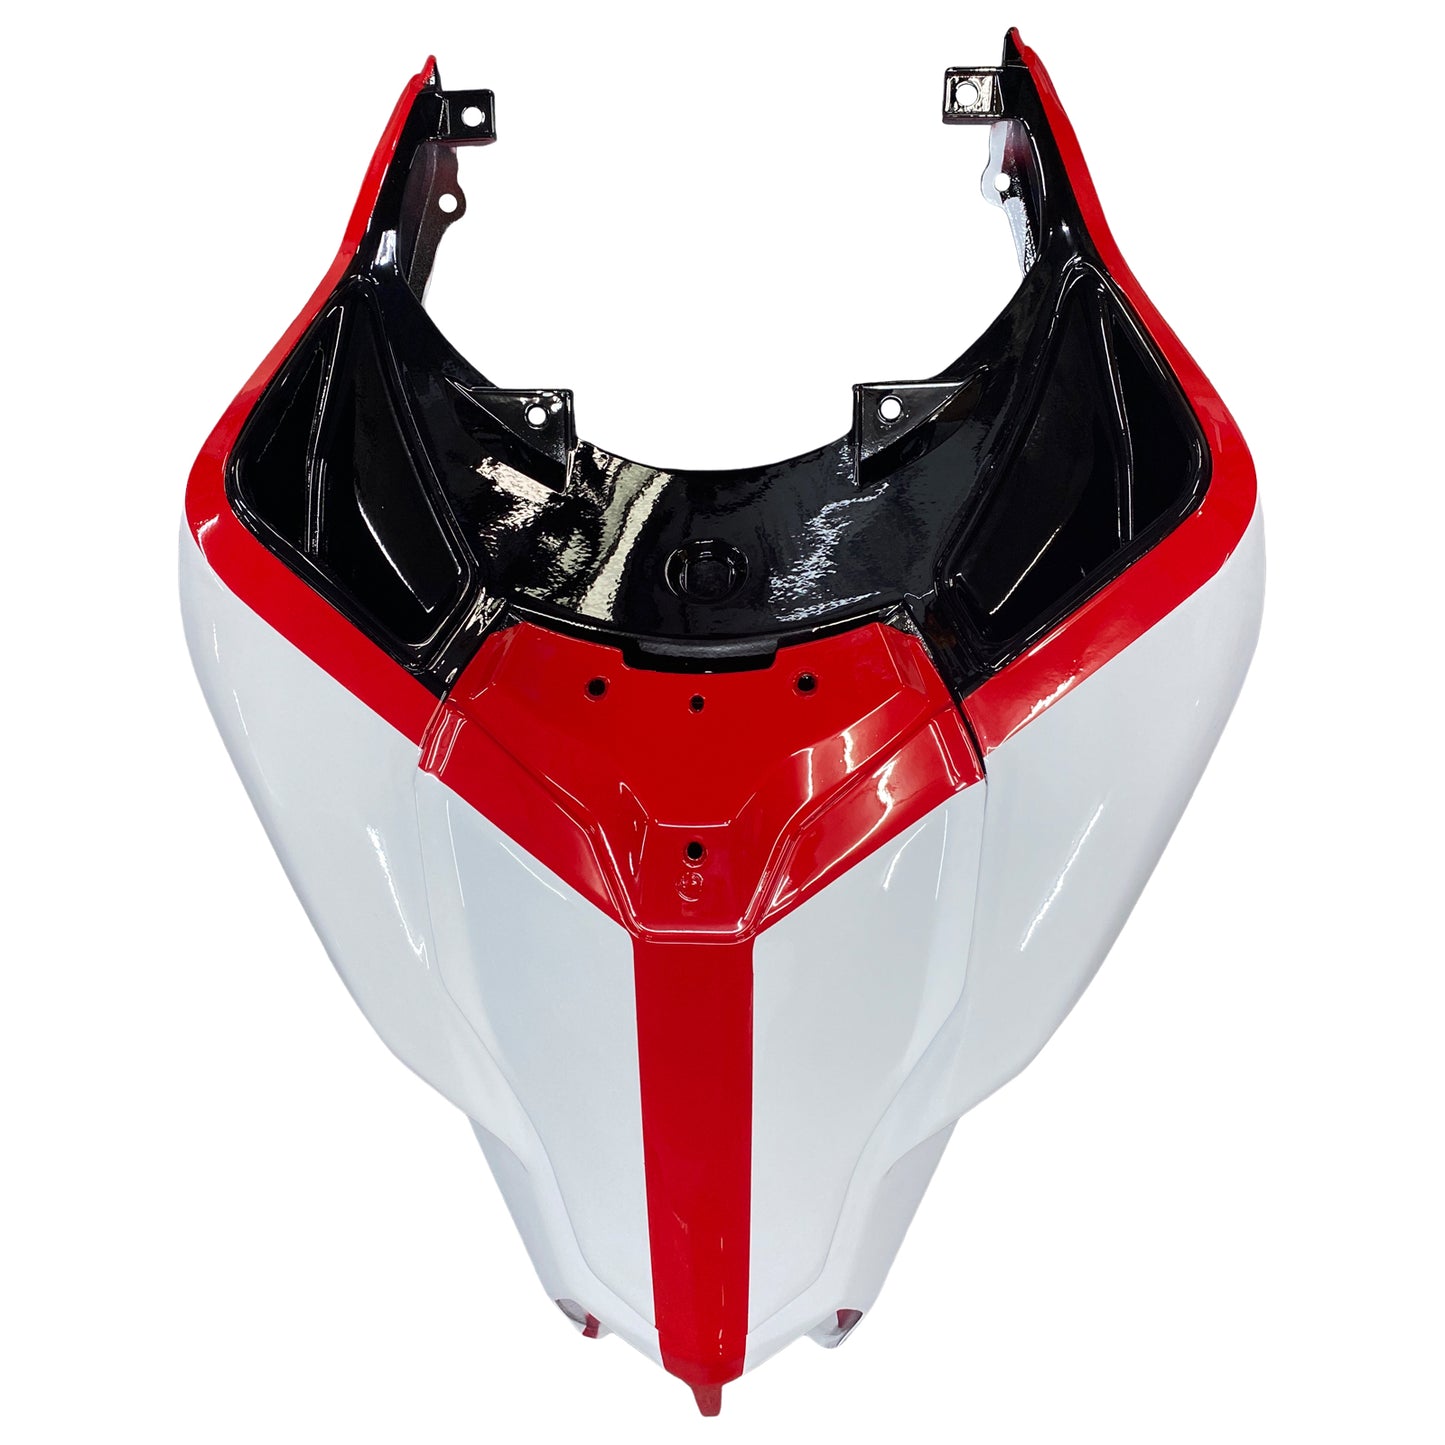 Amotopart 2007-2011 Ducati 1098 1198 848 Red White Fearing Kit